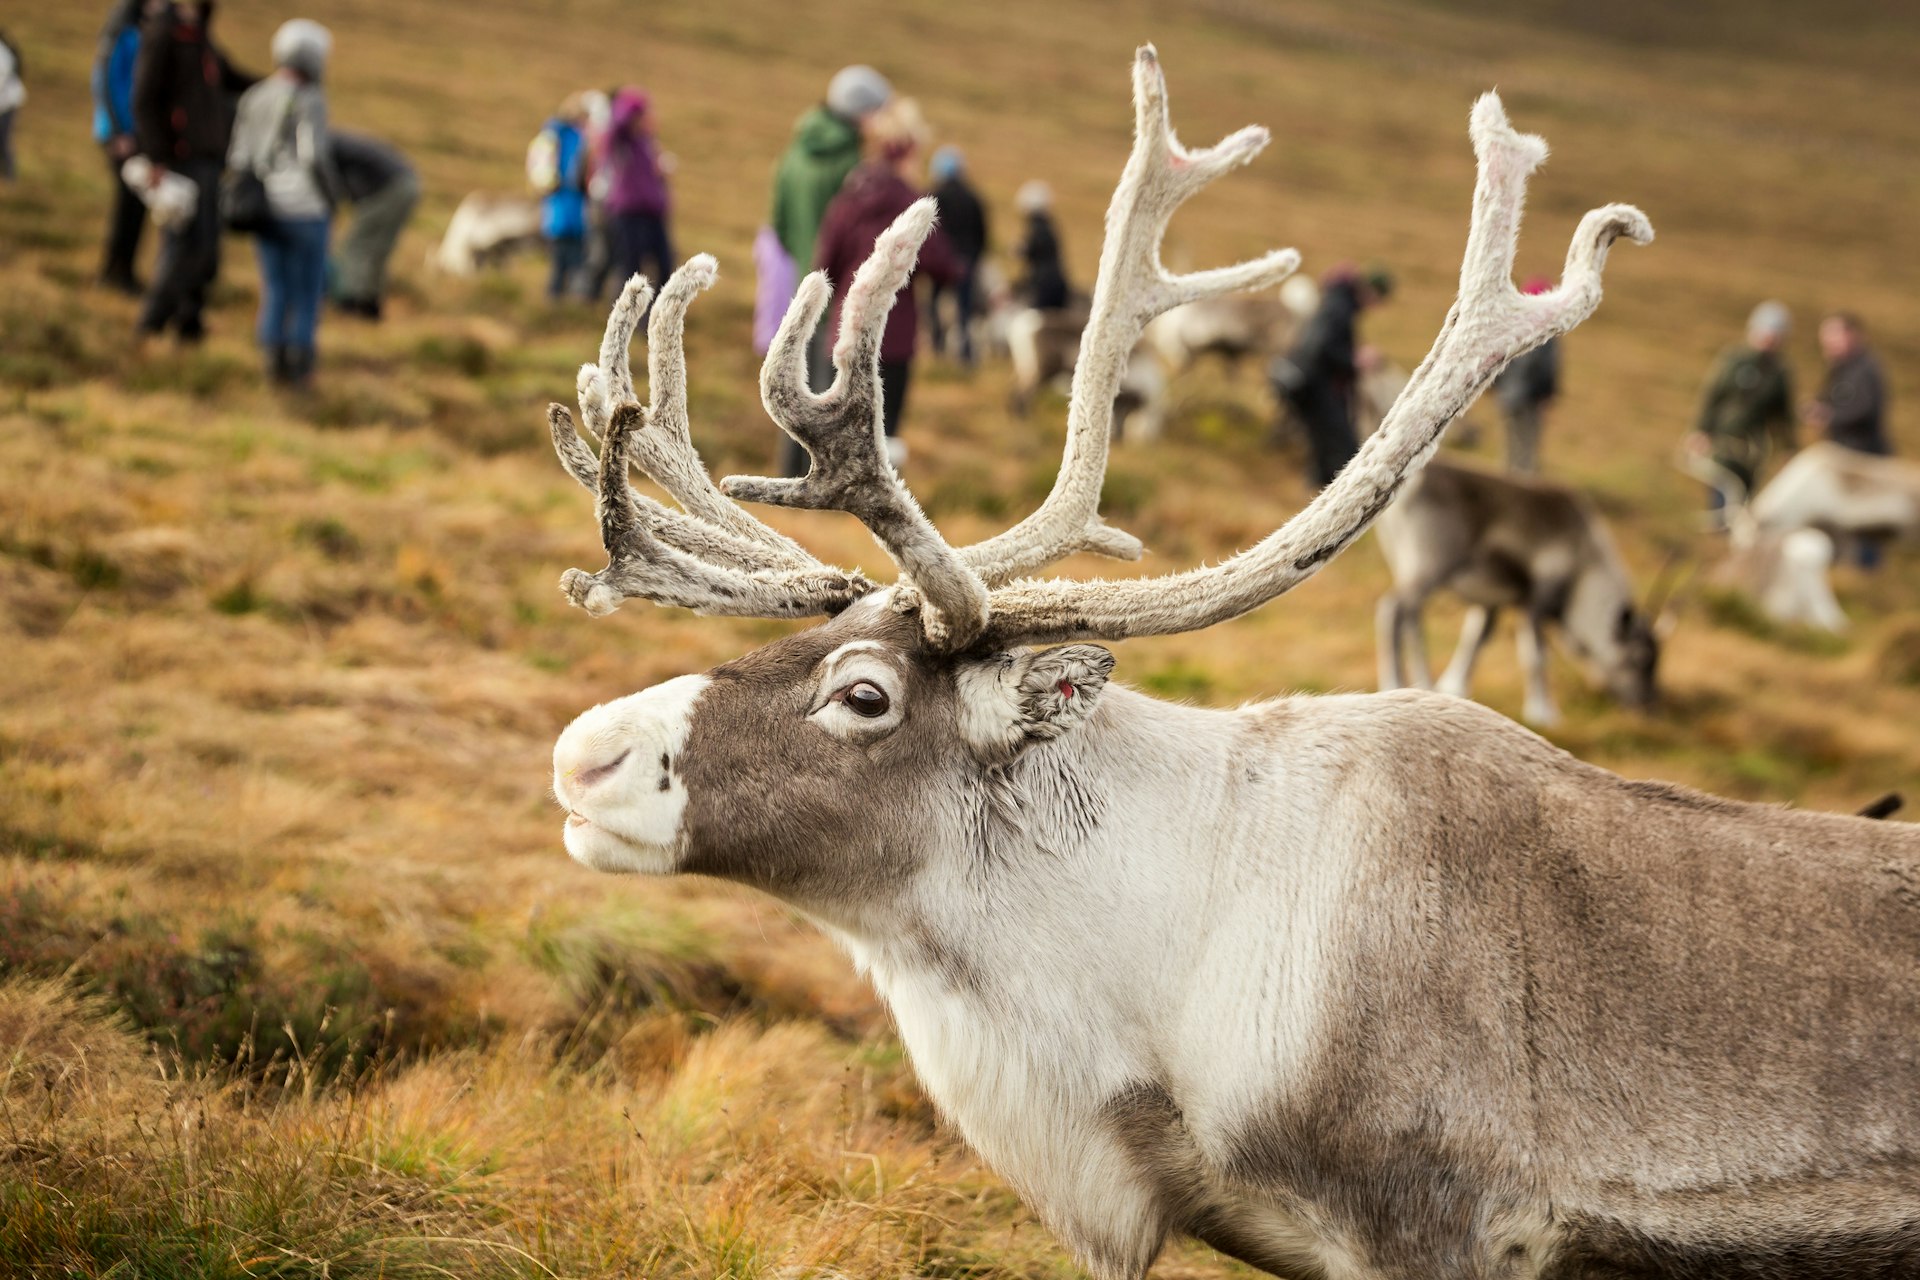 A reindeer walks through a pasture with people hiking nearby